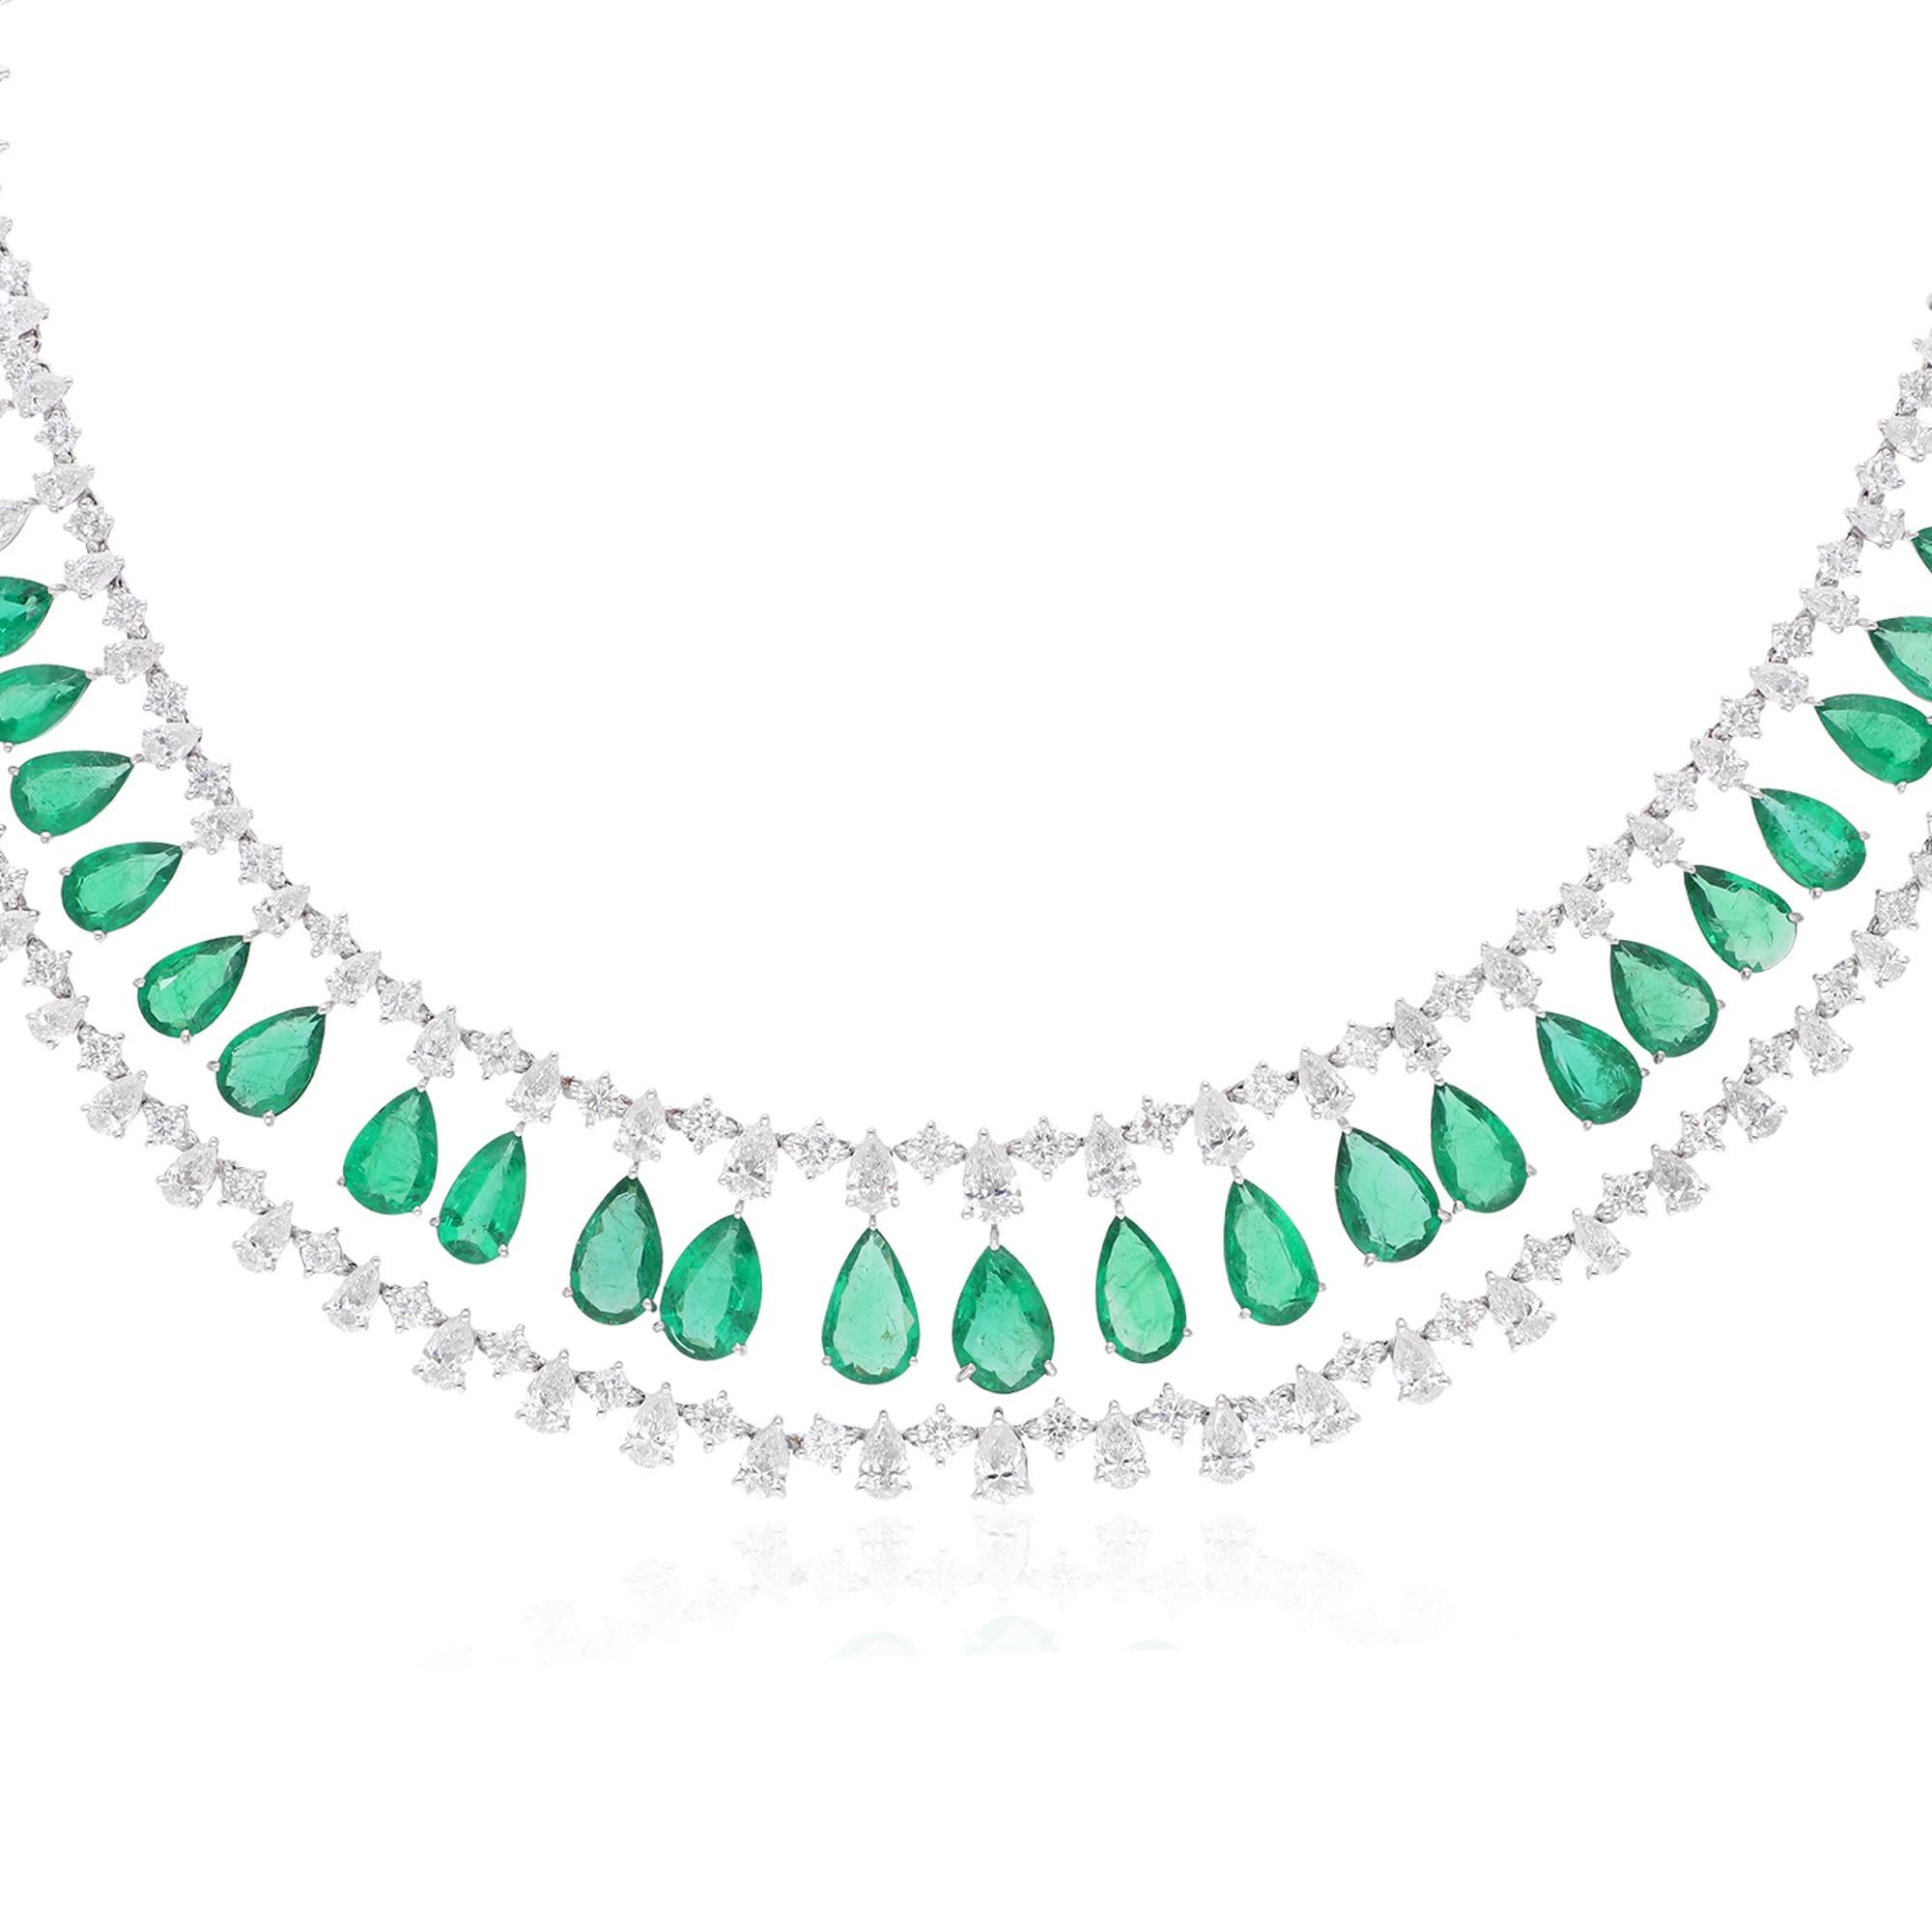 Surrounding the emerald are brilliant diamonds, meticulously set in 18 karat white gold to enhance their radiance and brilliance. These diamonds dance and shimmer with every movement, casting a spellbinding glow that complements the vibrant beauty